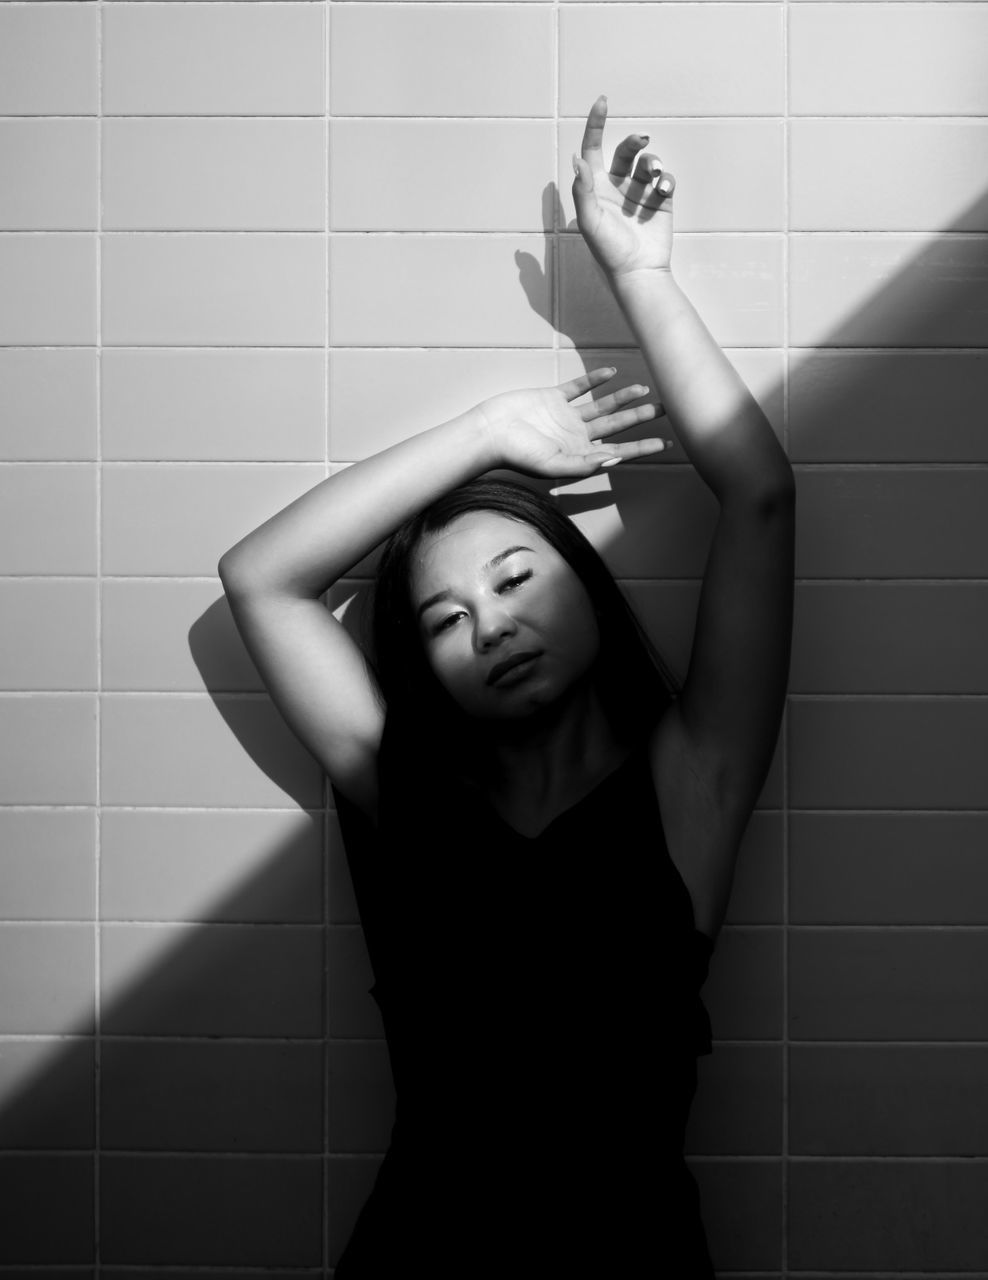 PORTRAIT OF YOUNG WOMAN WITH ARMS RAISED IN BATHROOM